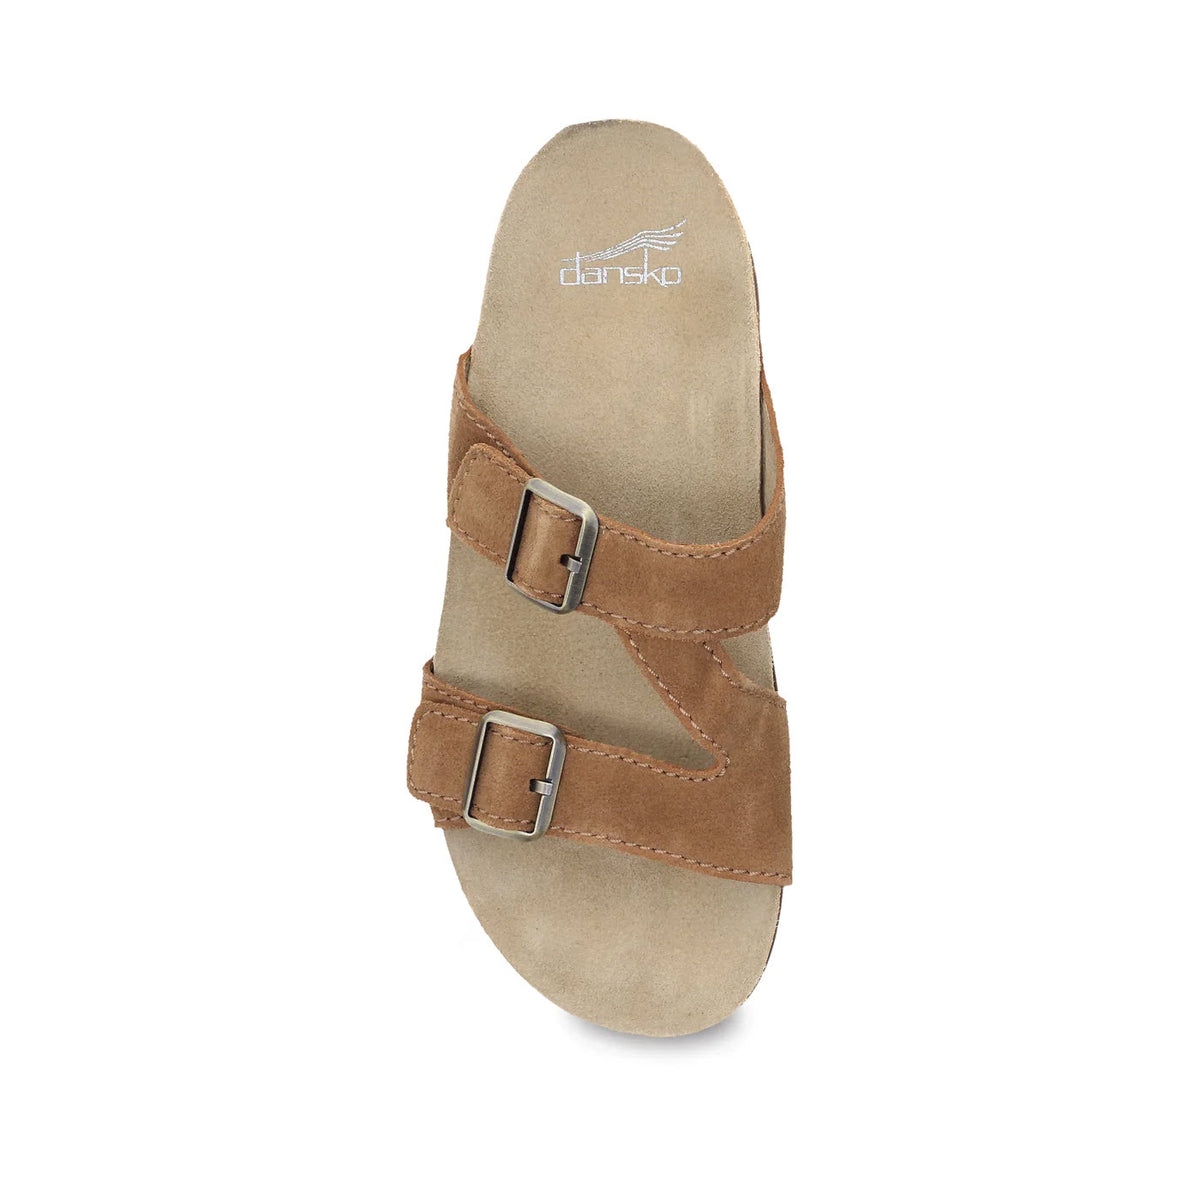 Top view of a single tan suede Dansko Dayna sandal with two adjustable straps featuring silver buckles, isolated on a white background.